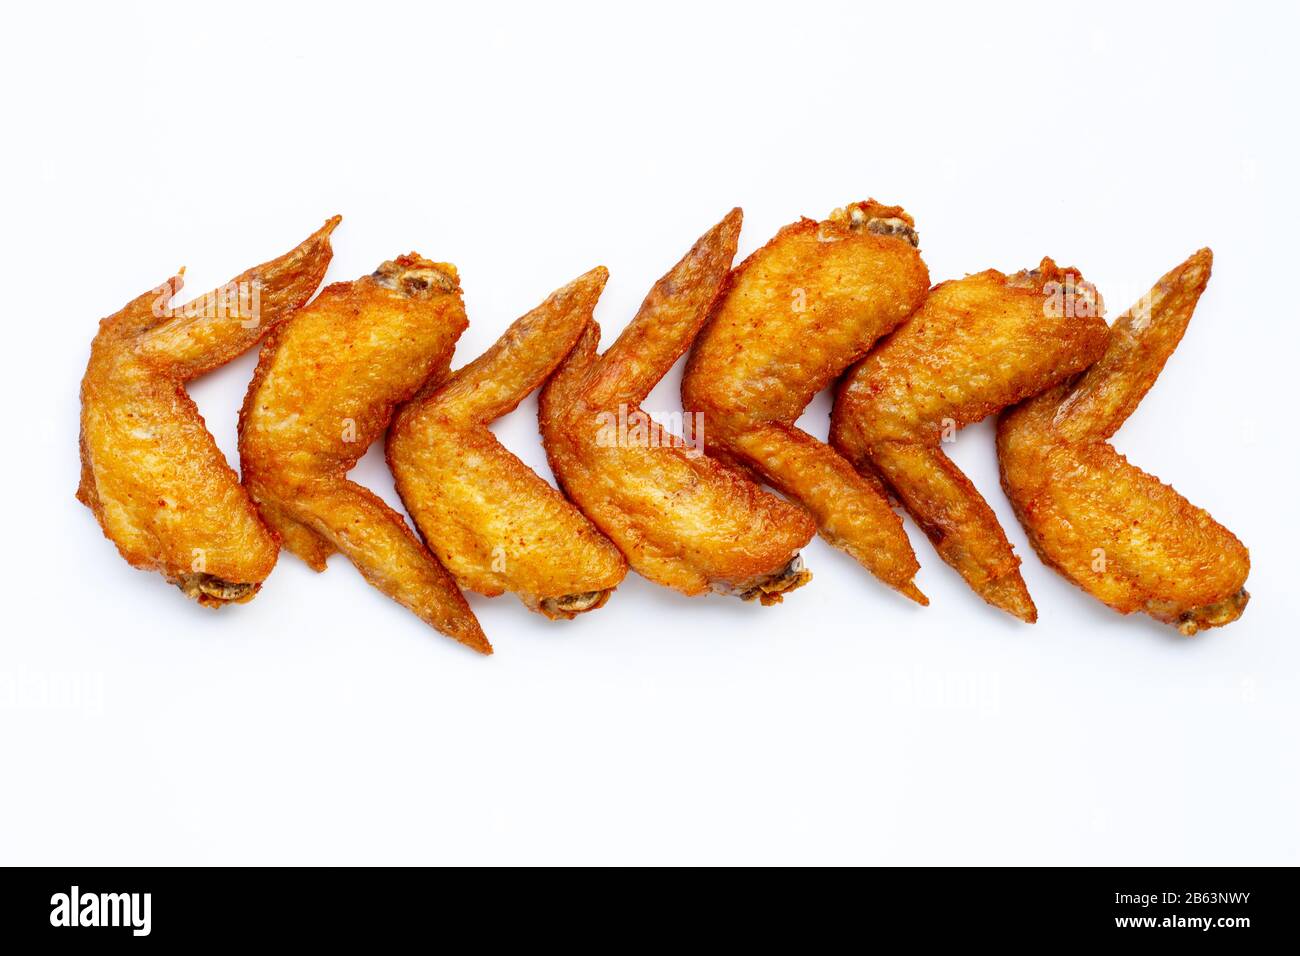 Fried chicken wings on white background. Stock Photo